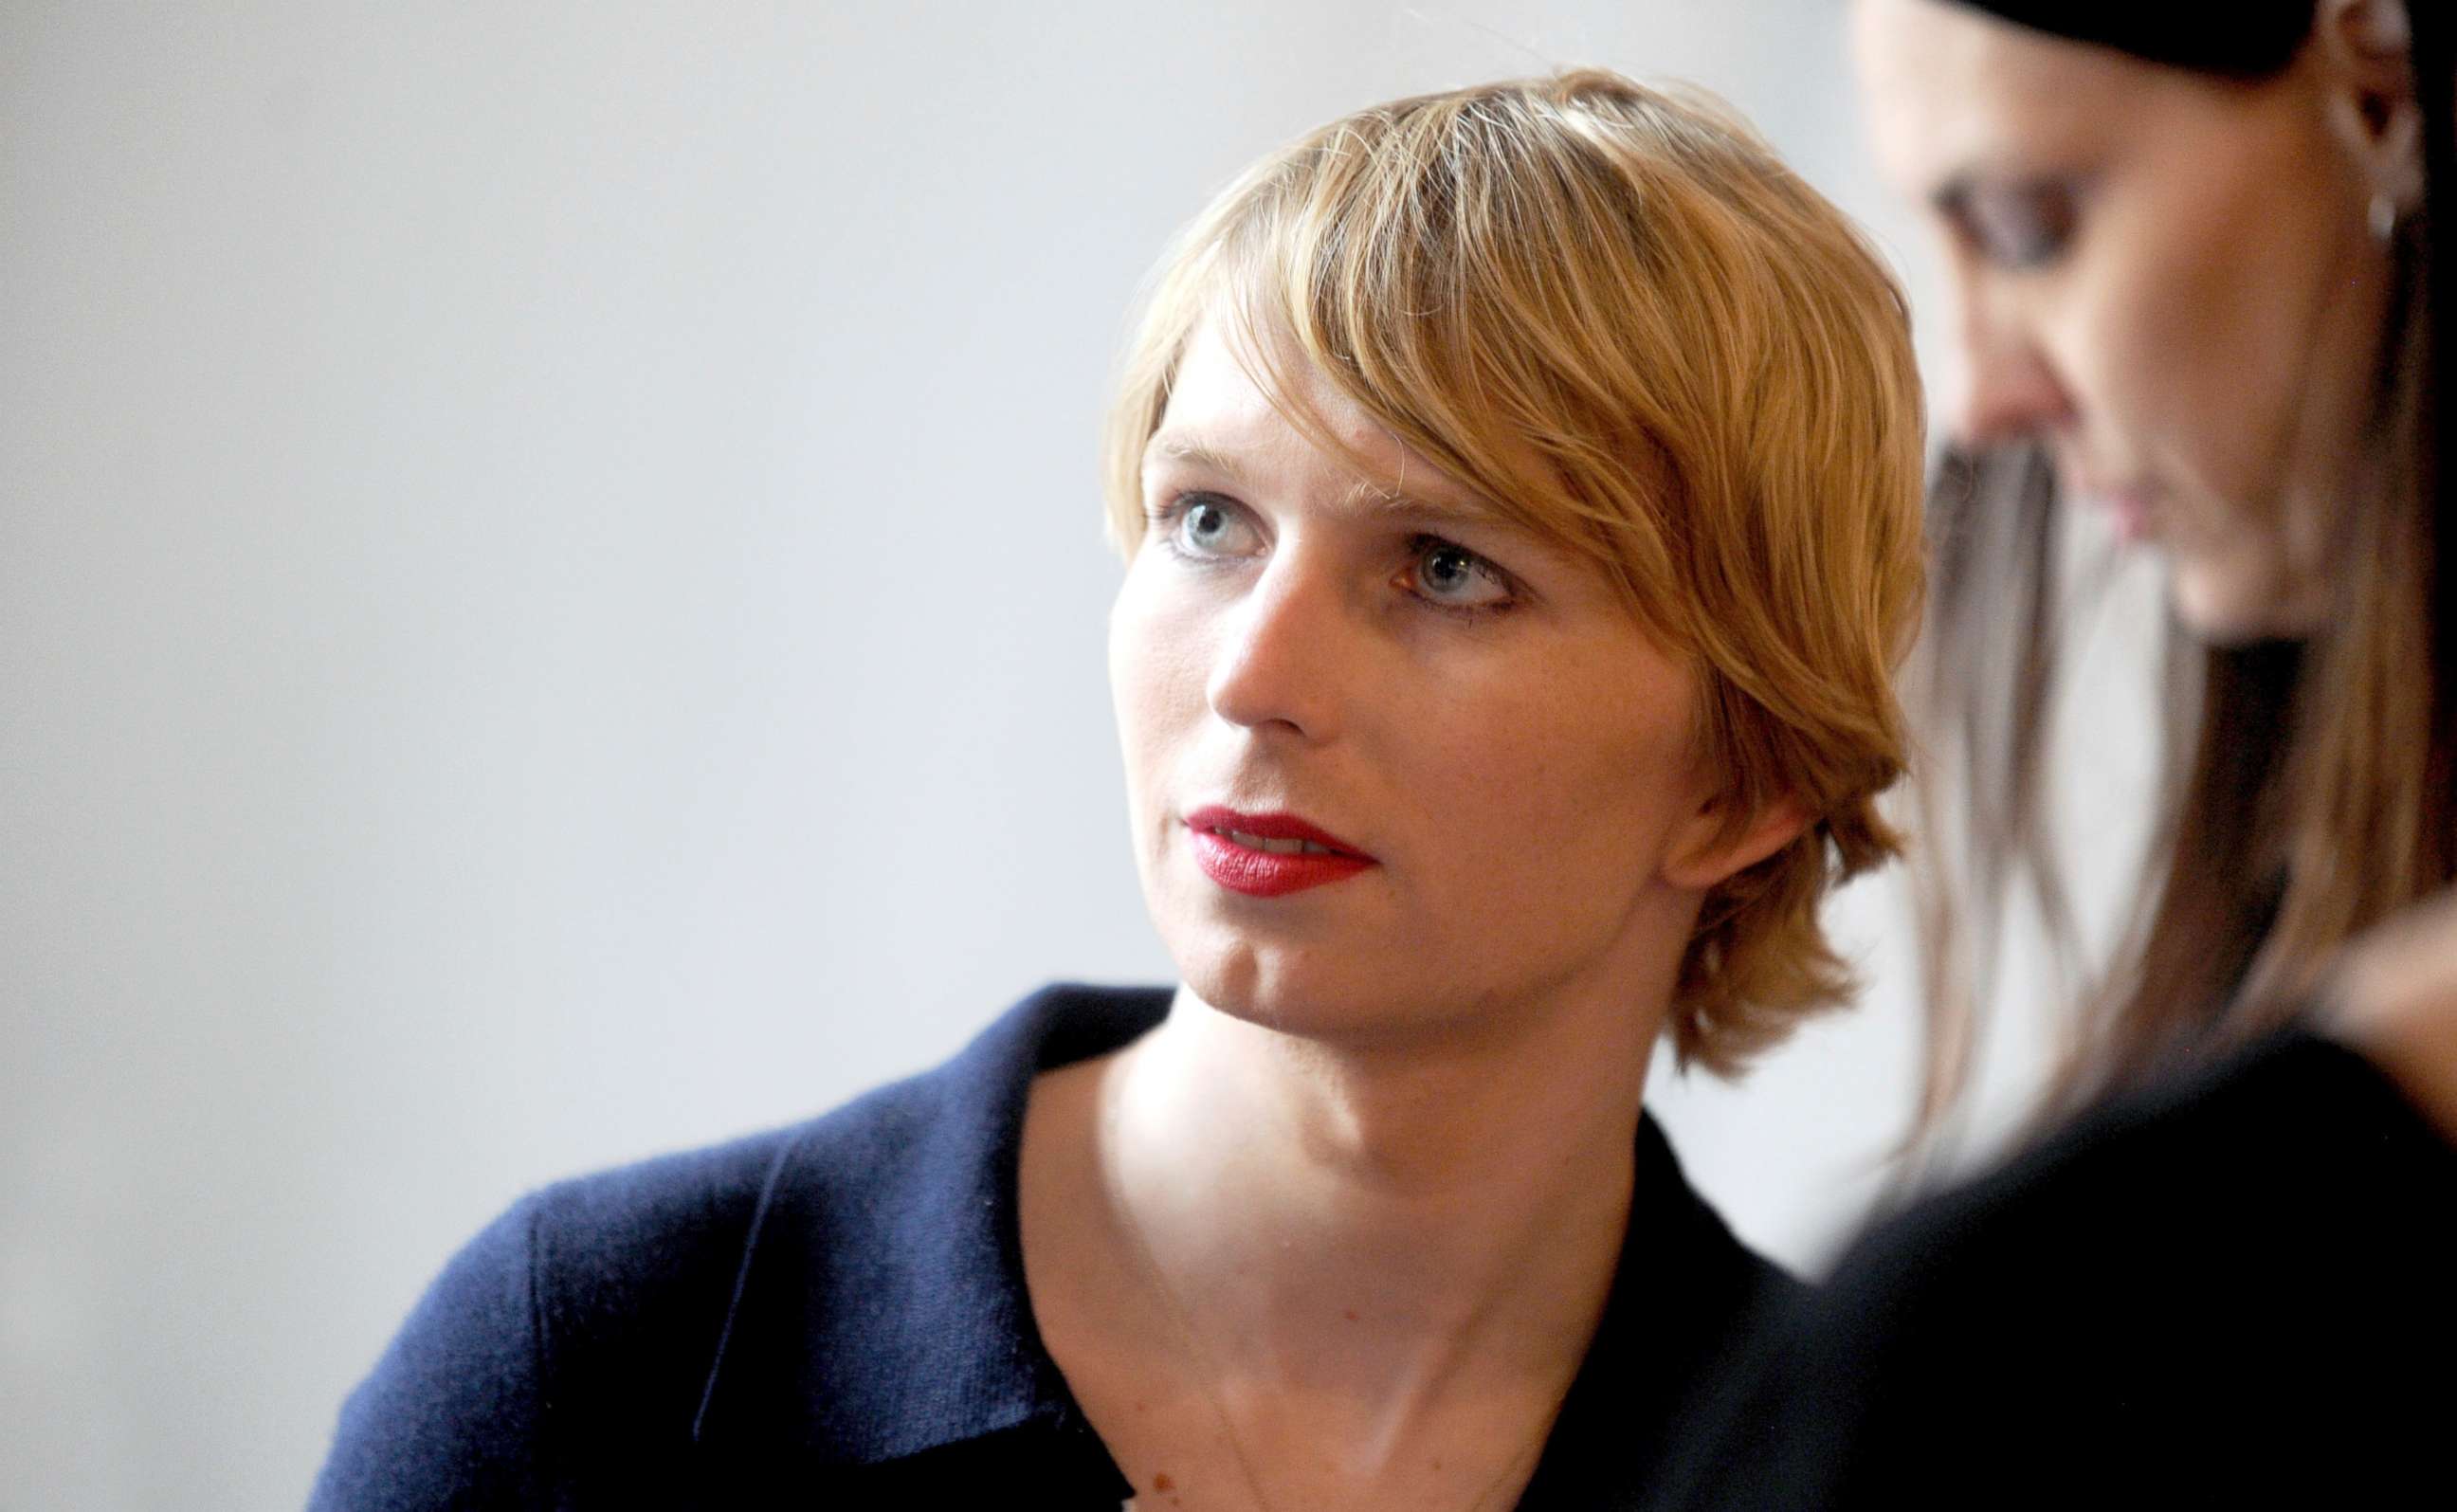 PHOTO: Chelsea Manning attends A Becoming Resemblance exhibition by Heather Dewey-Hagborg and Manning in New York City on August 2, 2017.